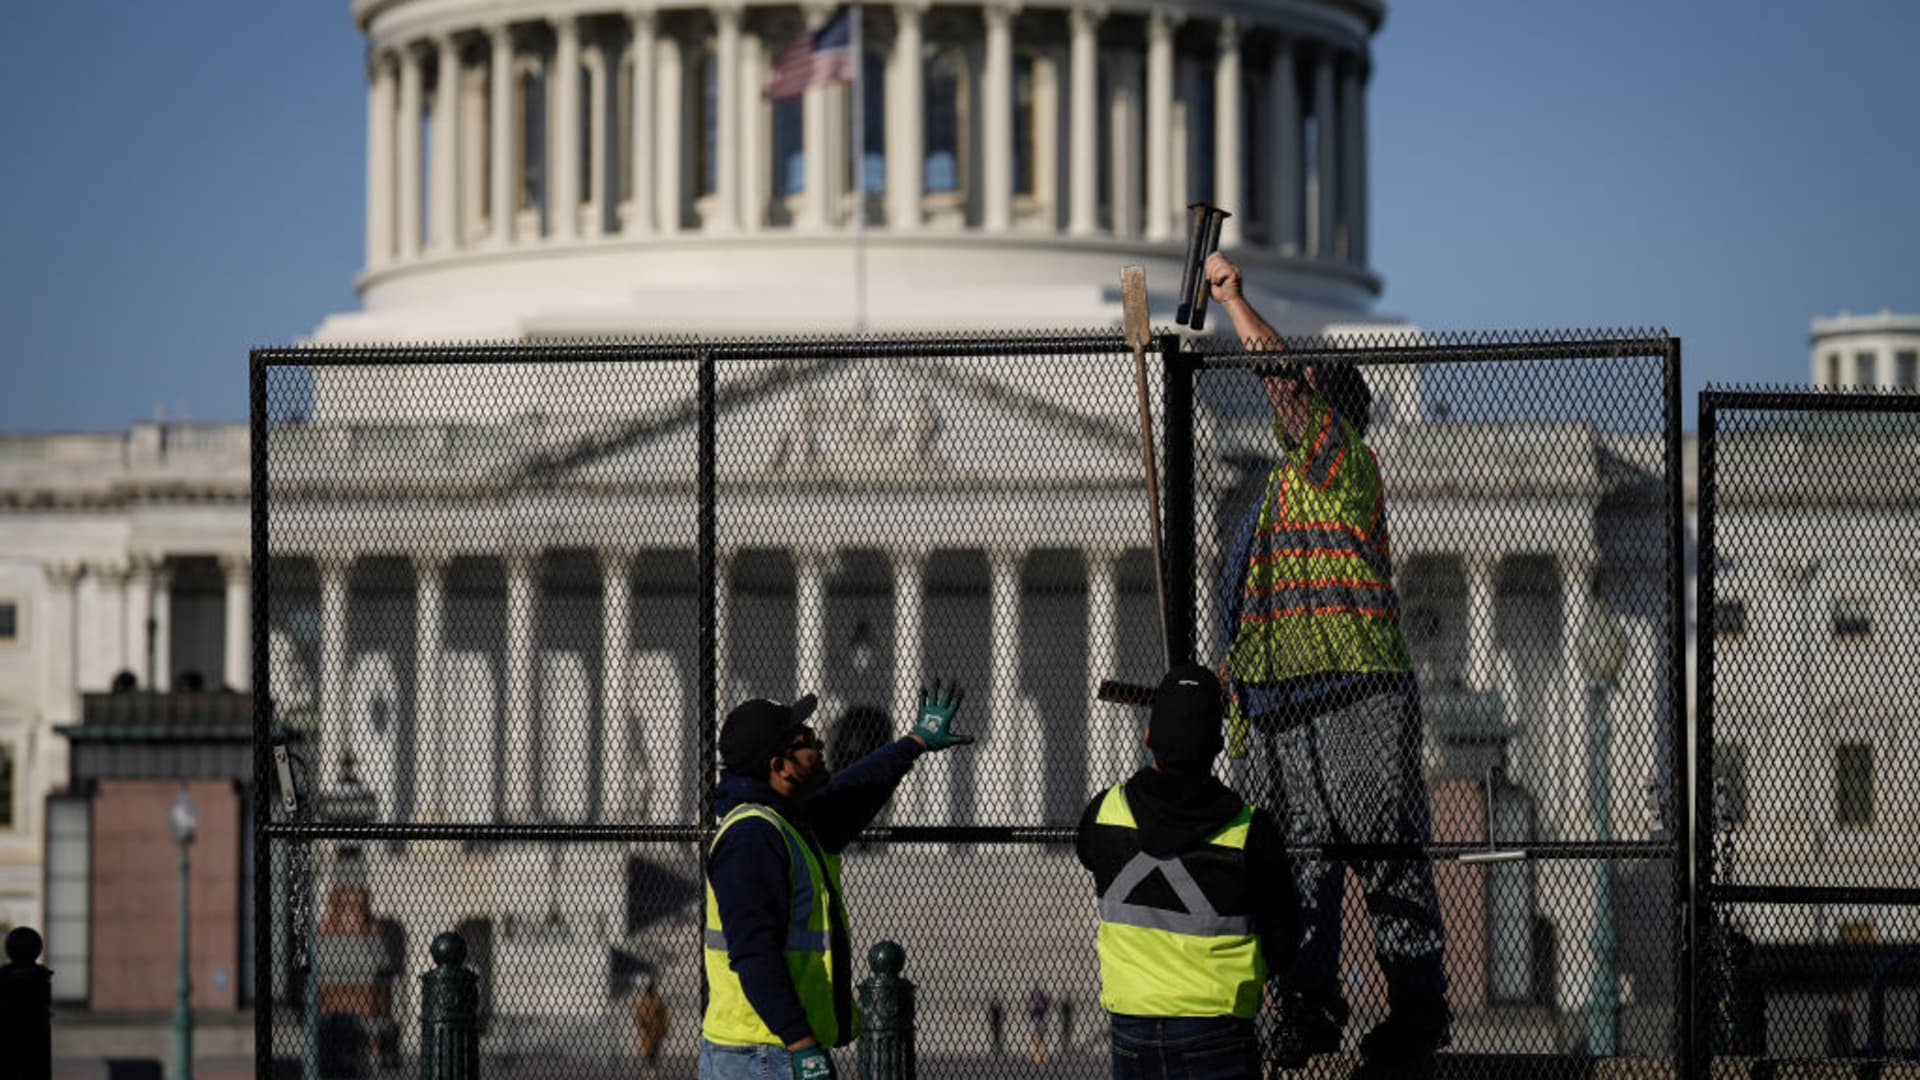 Workers install security fencing around the U.S. Capitol February 6, 2023 in Washington, DC. Security fencing has been installed as part of enhanced security measures ahead of President Joe Biden's State of the Union address on Tuesday evening.